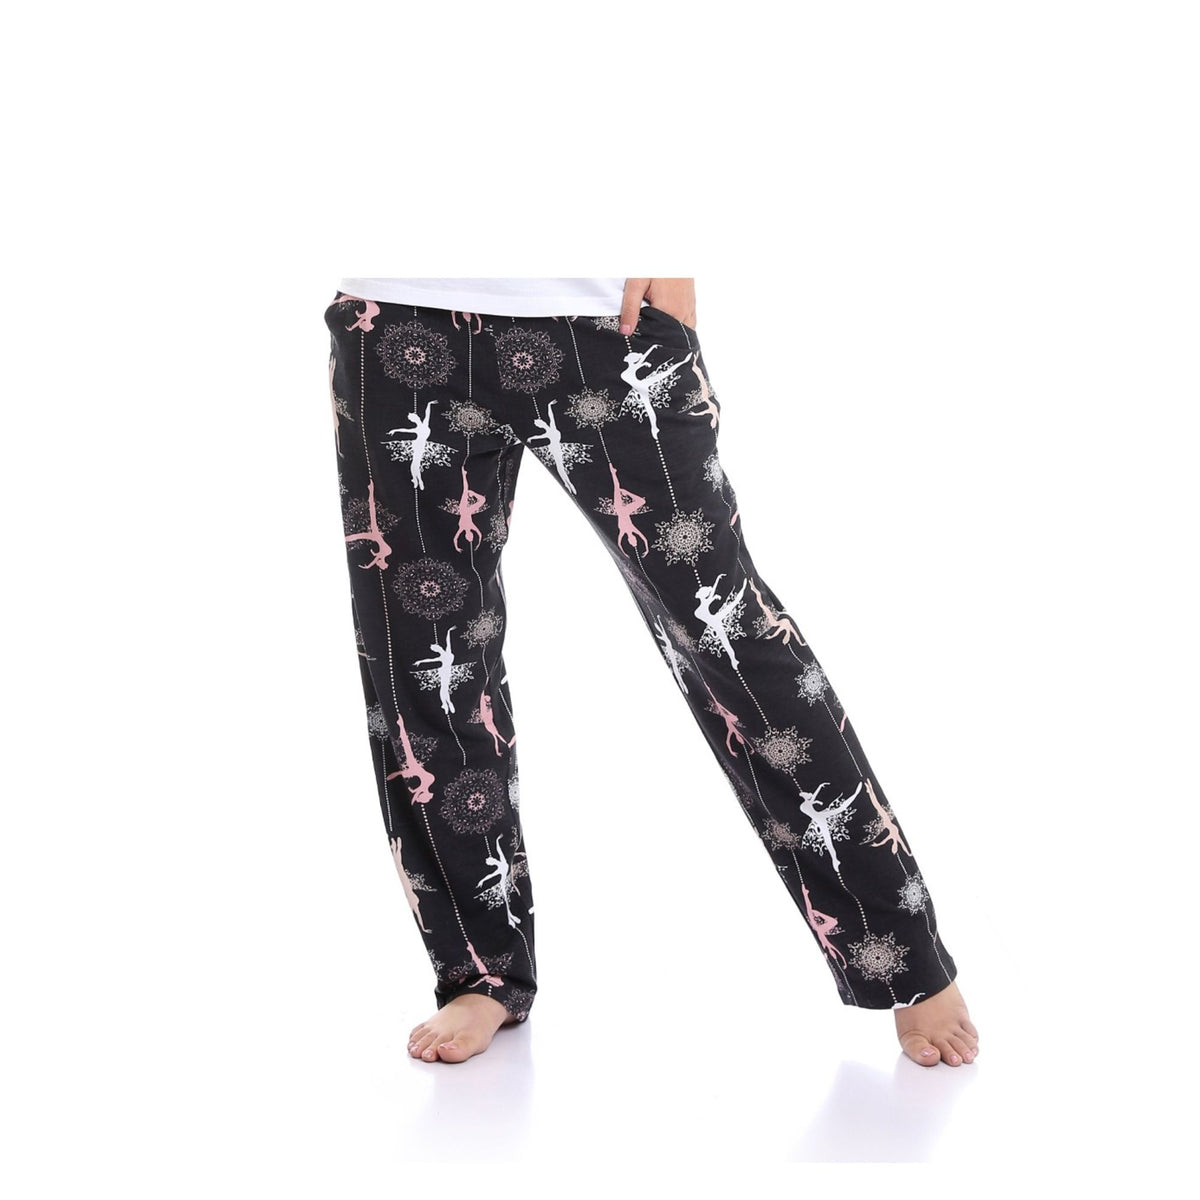 Women's Black Sweatpants - Classic and Comfortable Lounge Bottoms